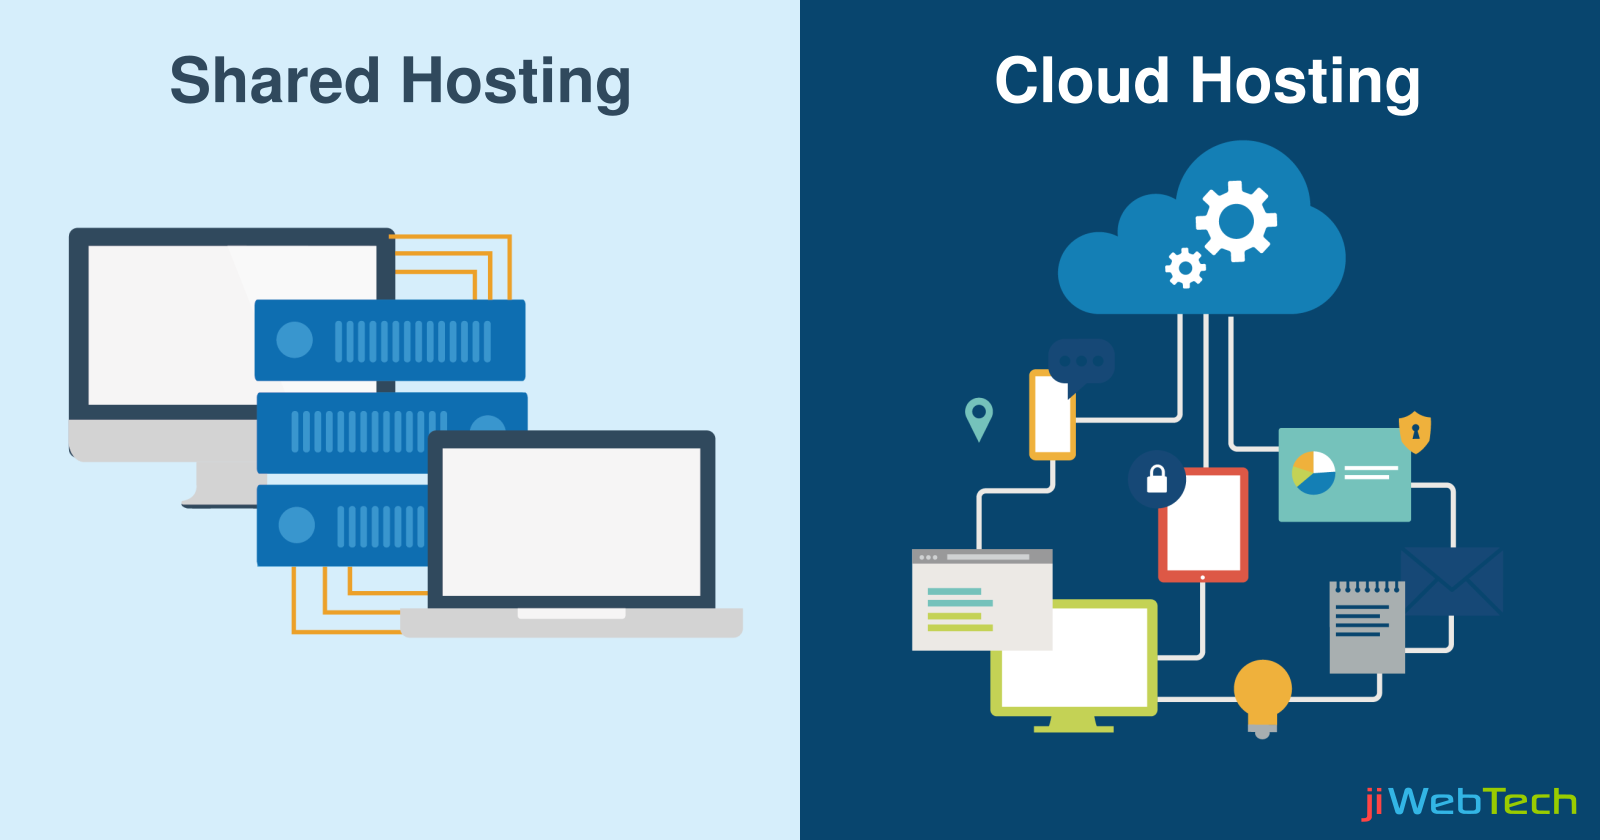 Should You Switch From Shared to Cloud Hosting?